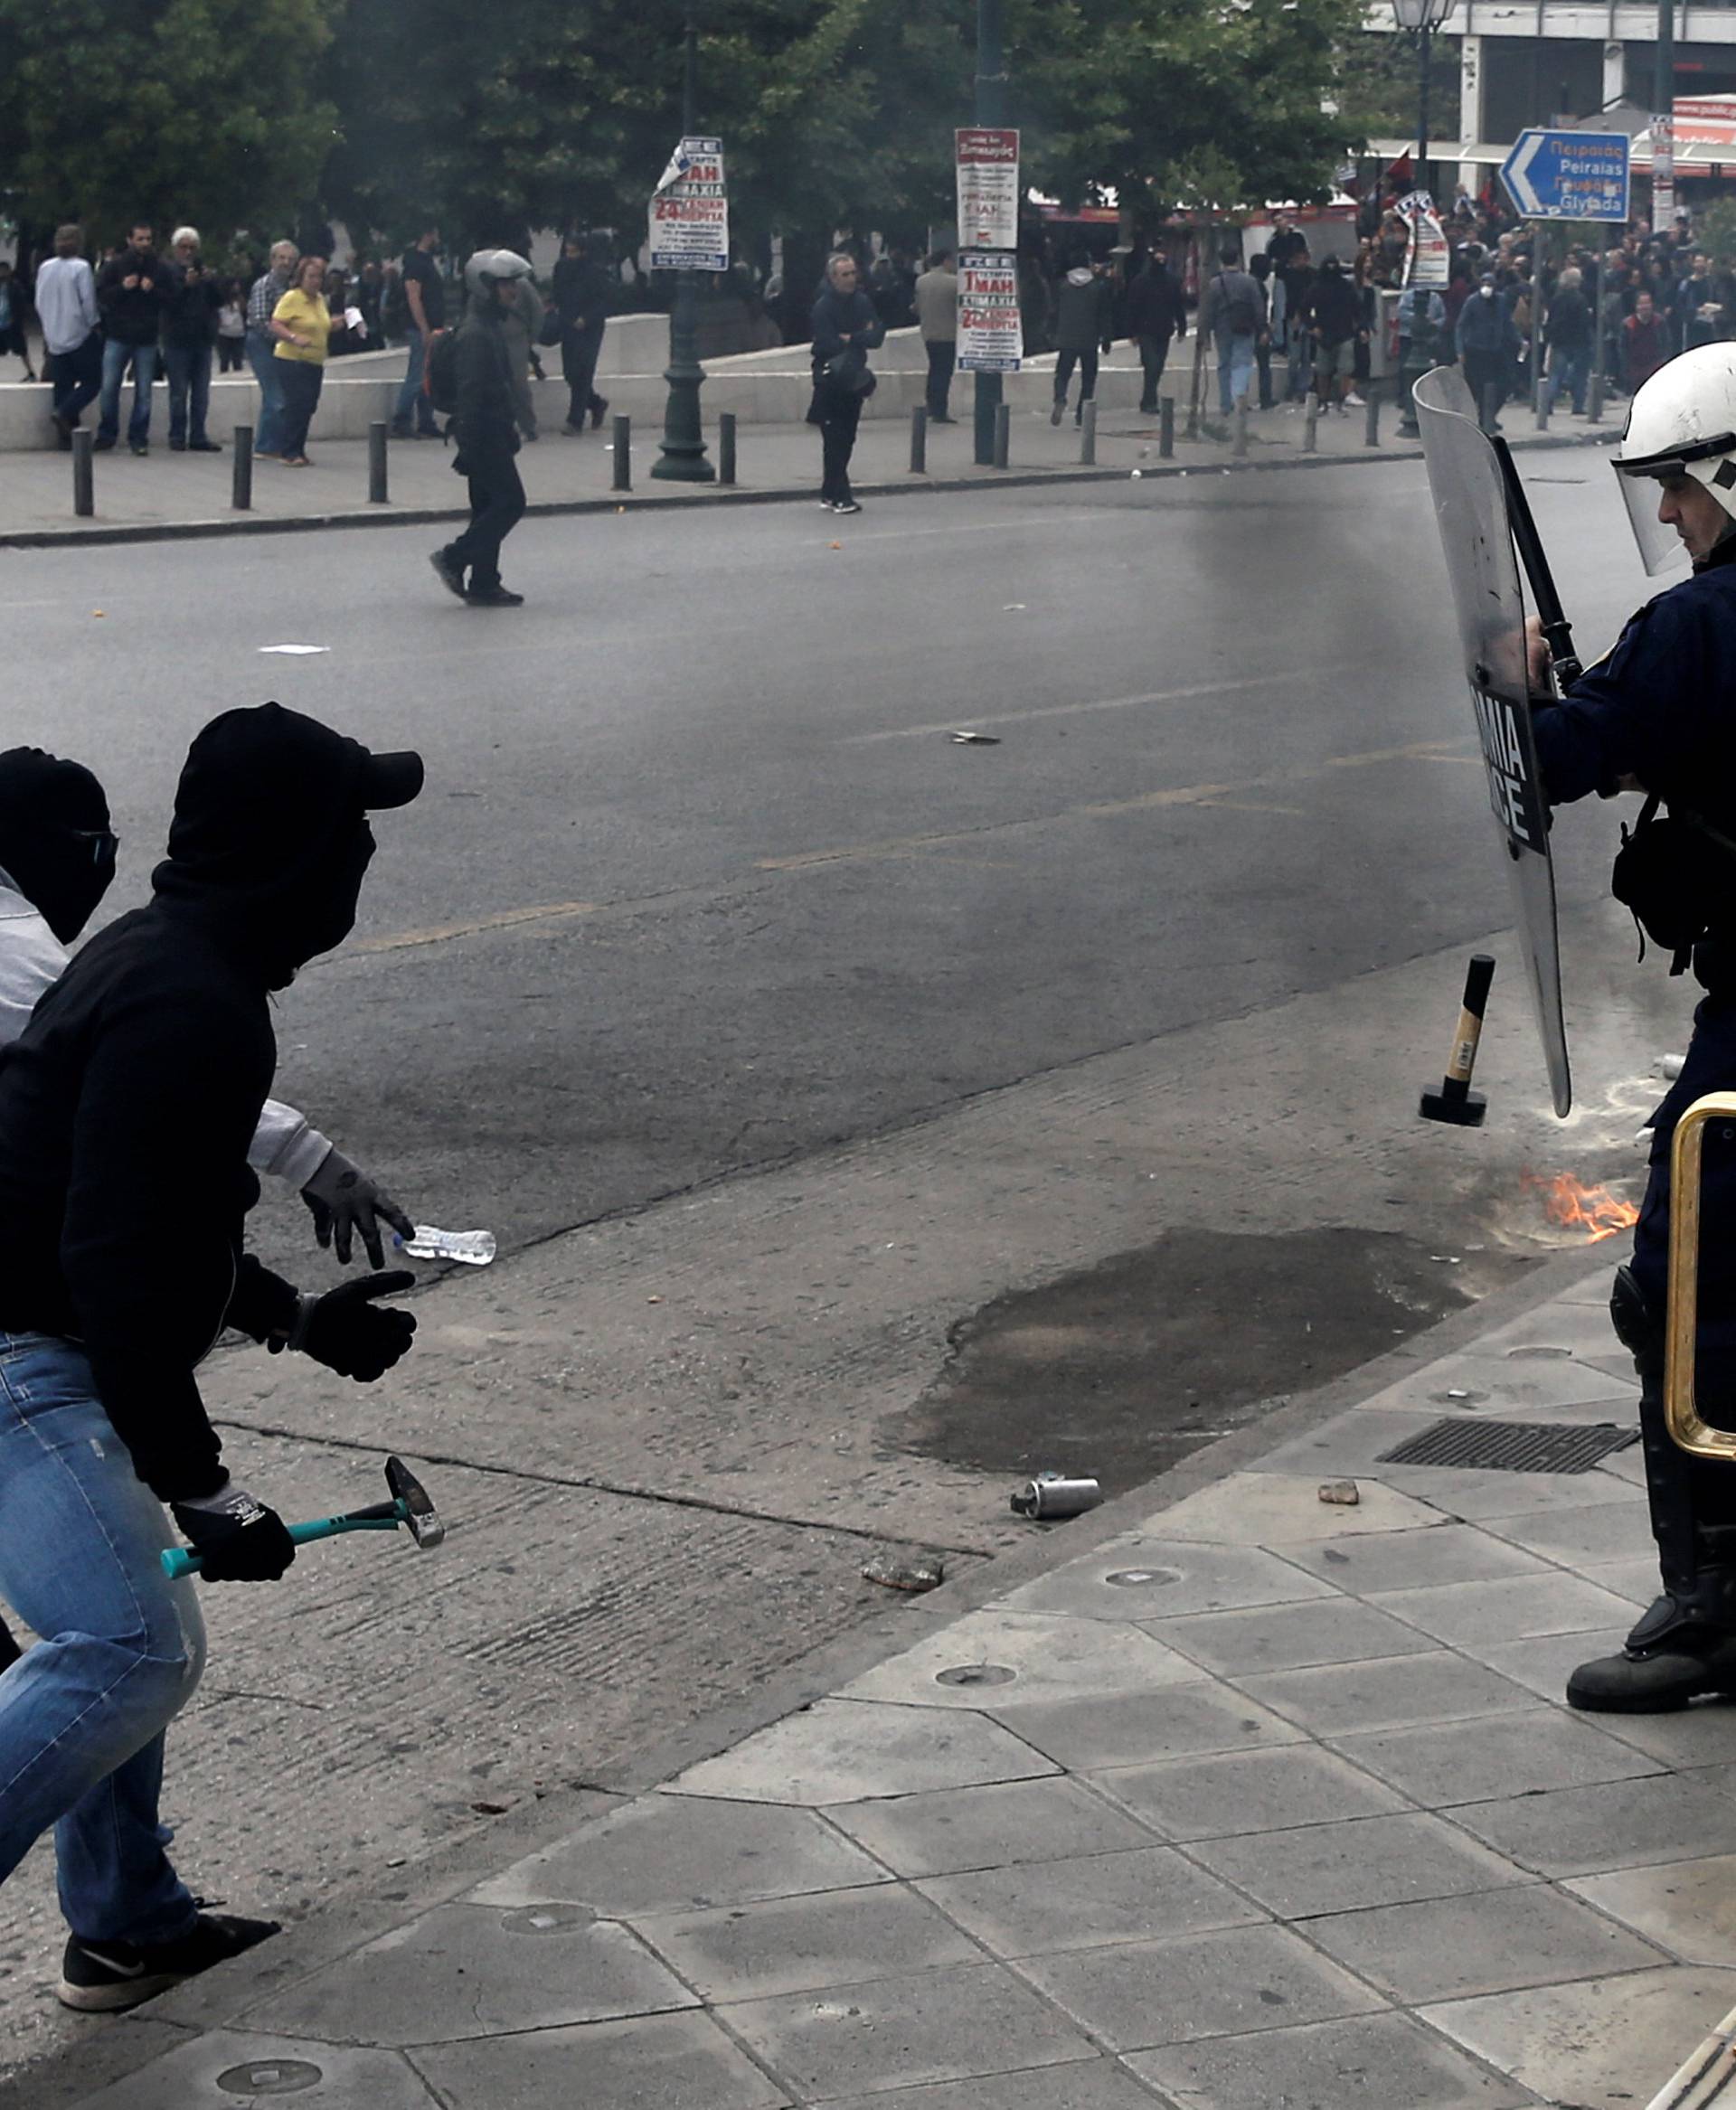 A demonstrator throws a hammer at riot police during a demonstration marking a 24-hour general strike against the latest round of austerity in Athens